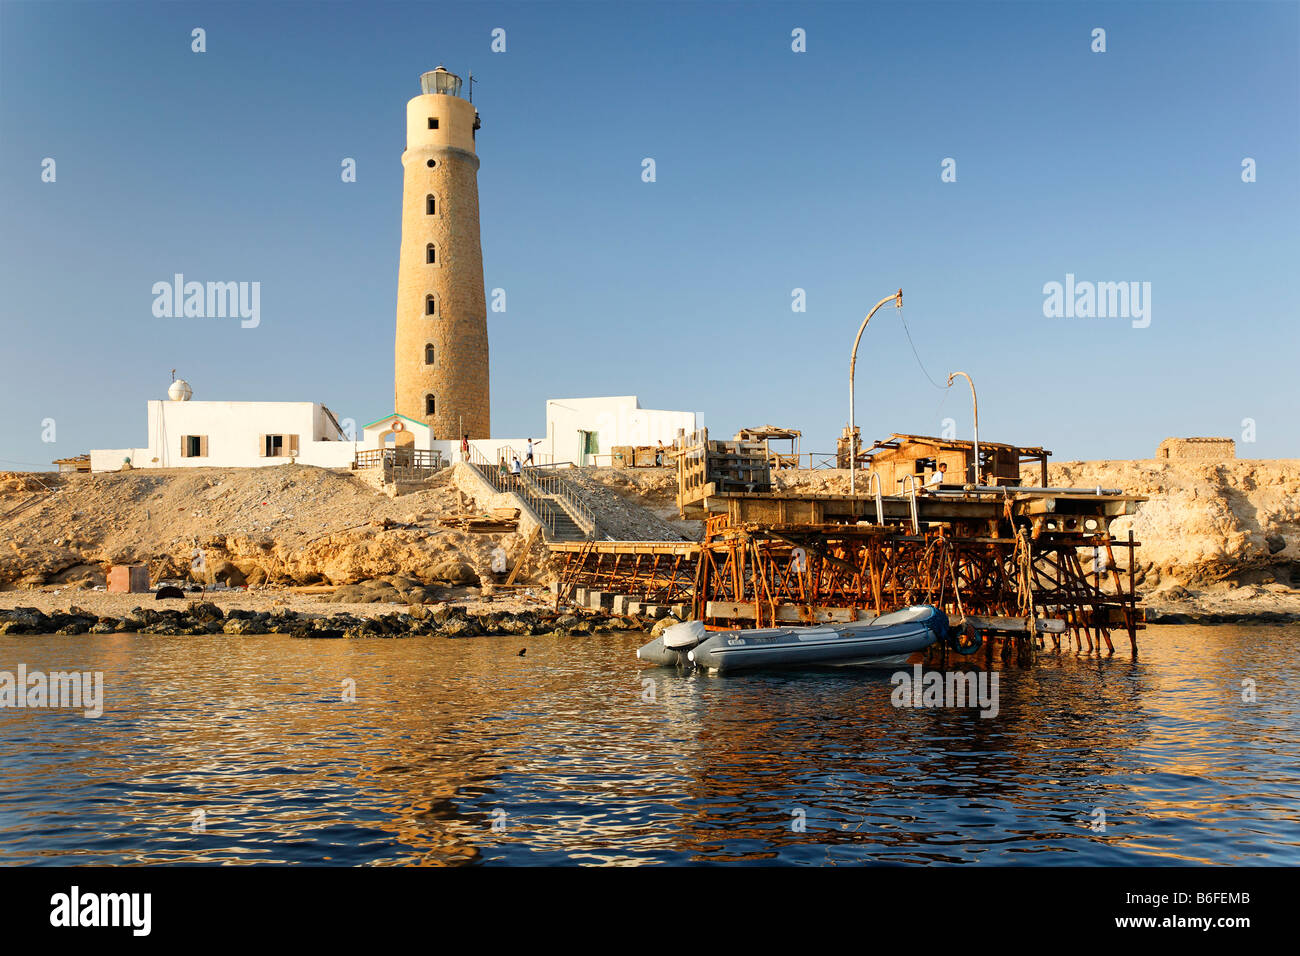 Lighthouse and pier on island with no vegetation, top scuba diving location, The Brother Islands or El Akhawein in Arabic, Egyp Stock Photo